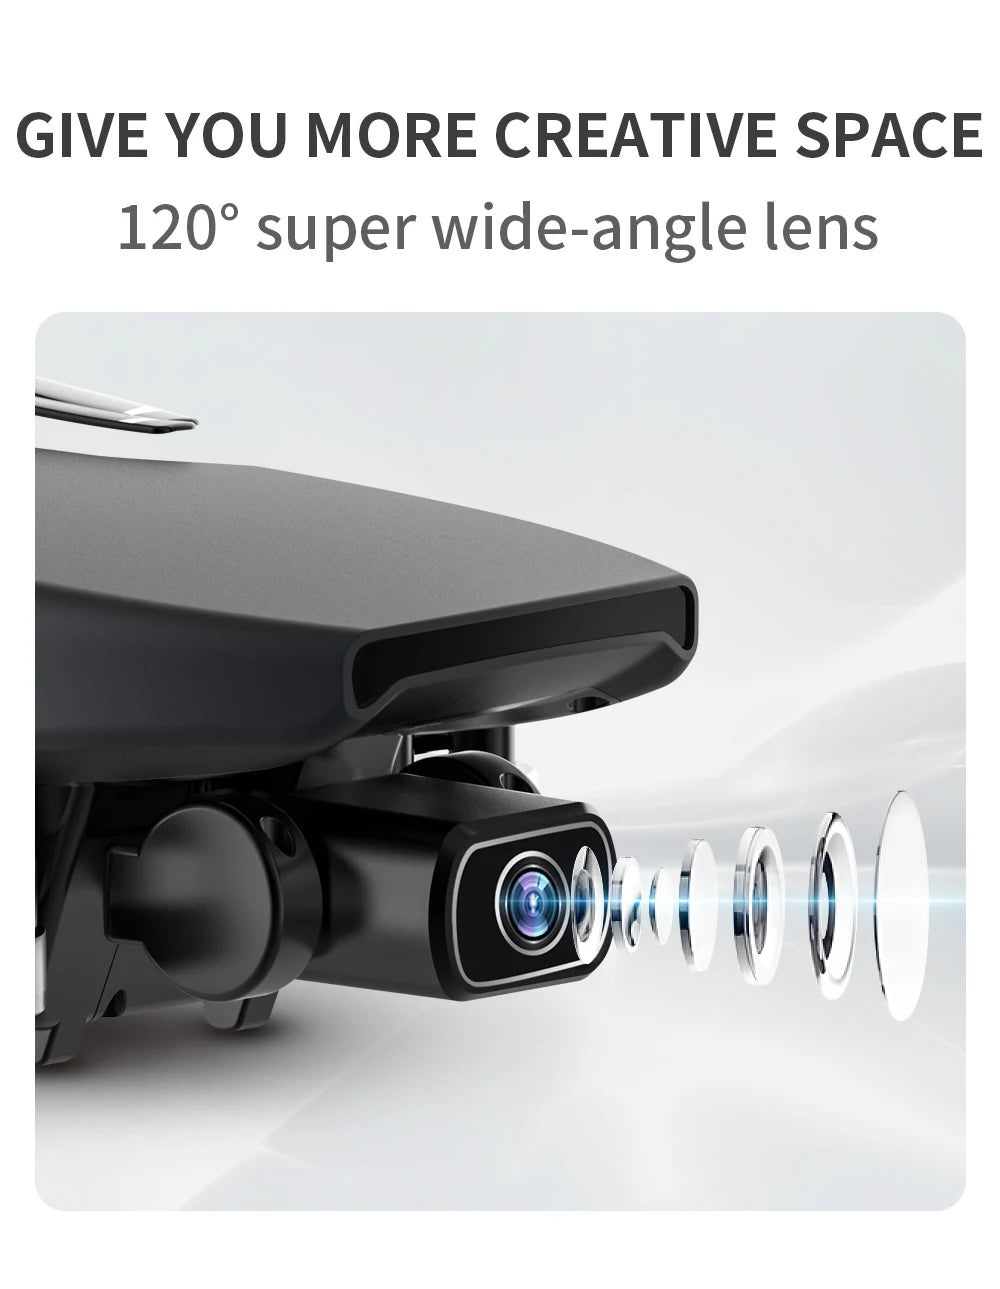 ZLRC SG108 Drone, GIVE YOU MORE CREATIVE SPACE 1209 super wide-angle lens 